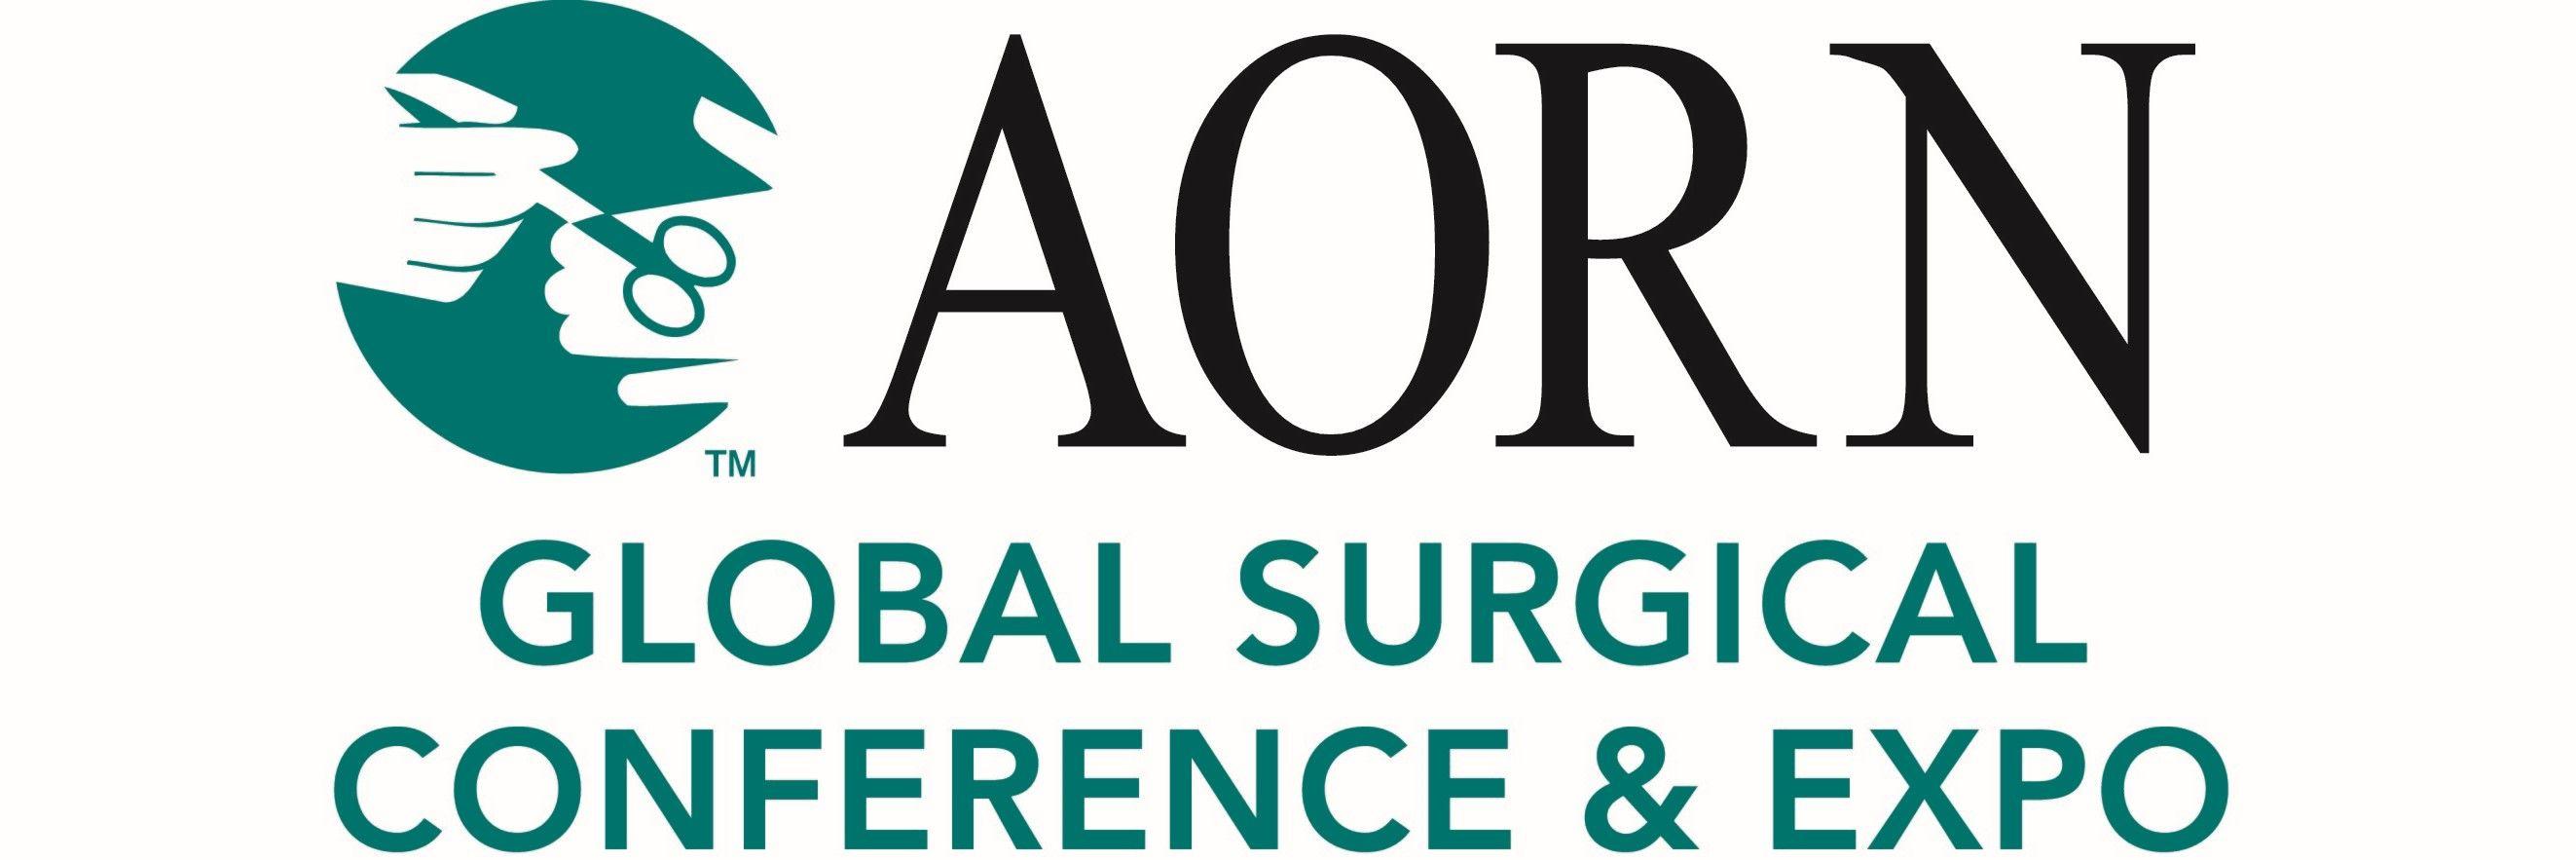 AORN Logo - AORN Surgical Conference & Expo. Solutions Designed For Healthcare